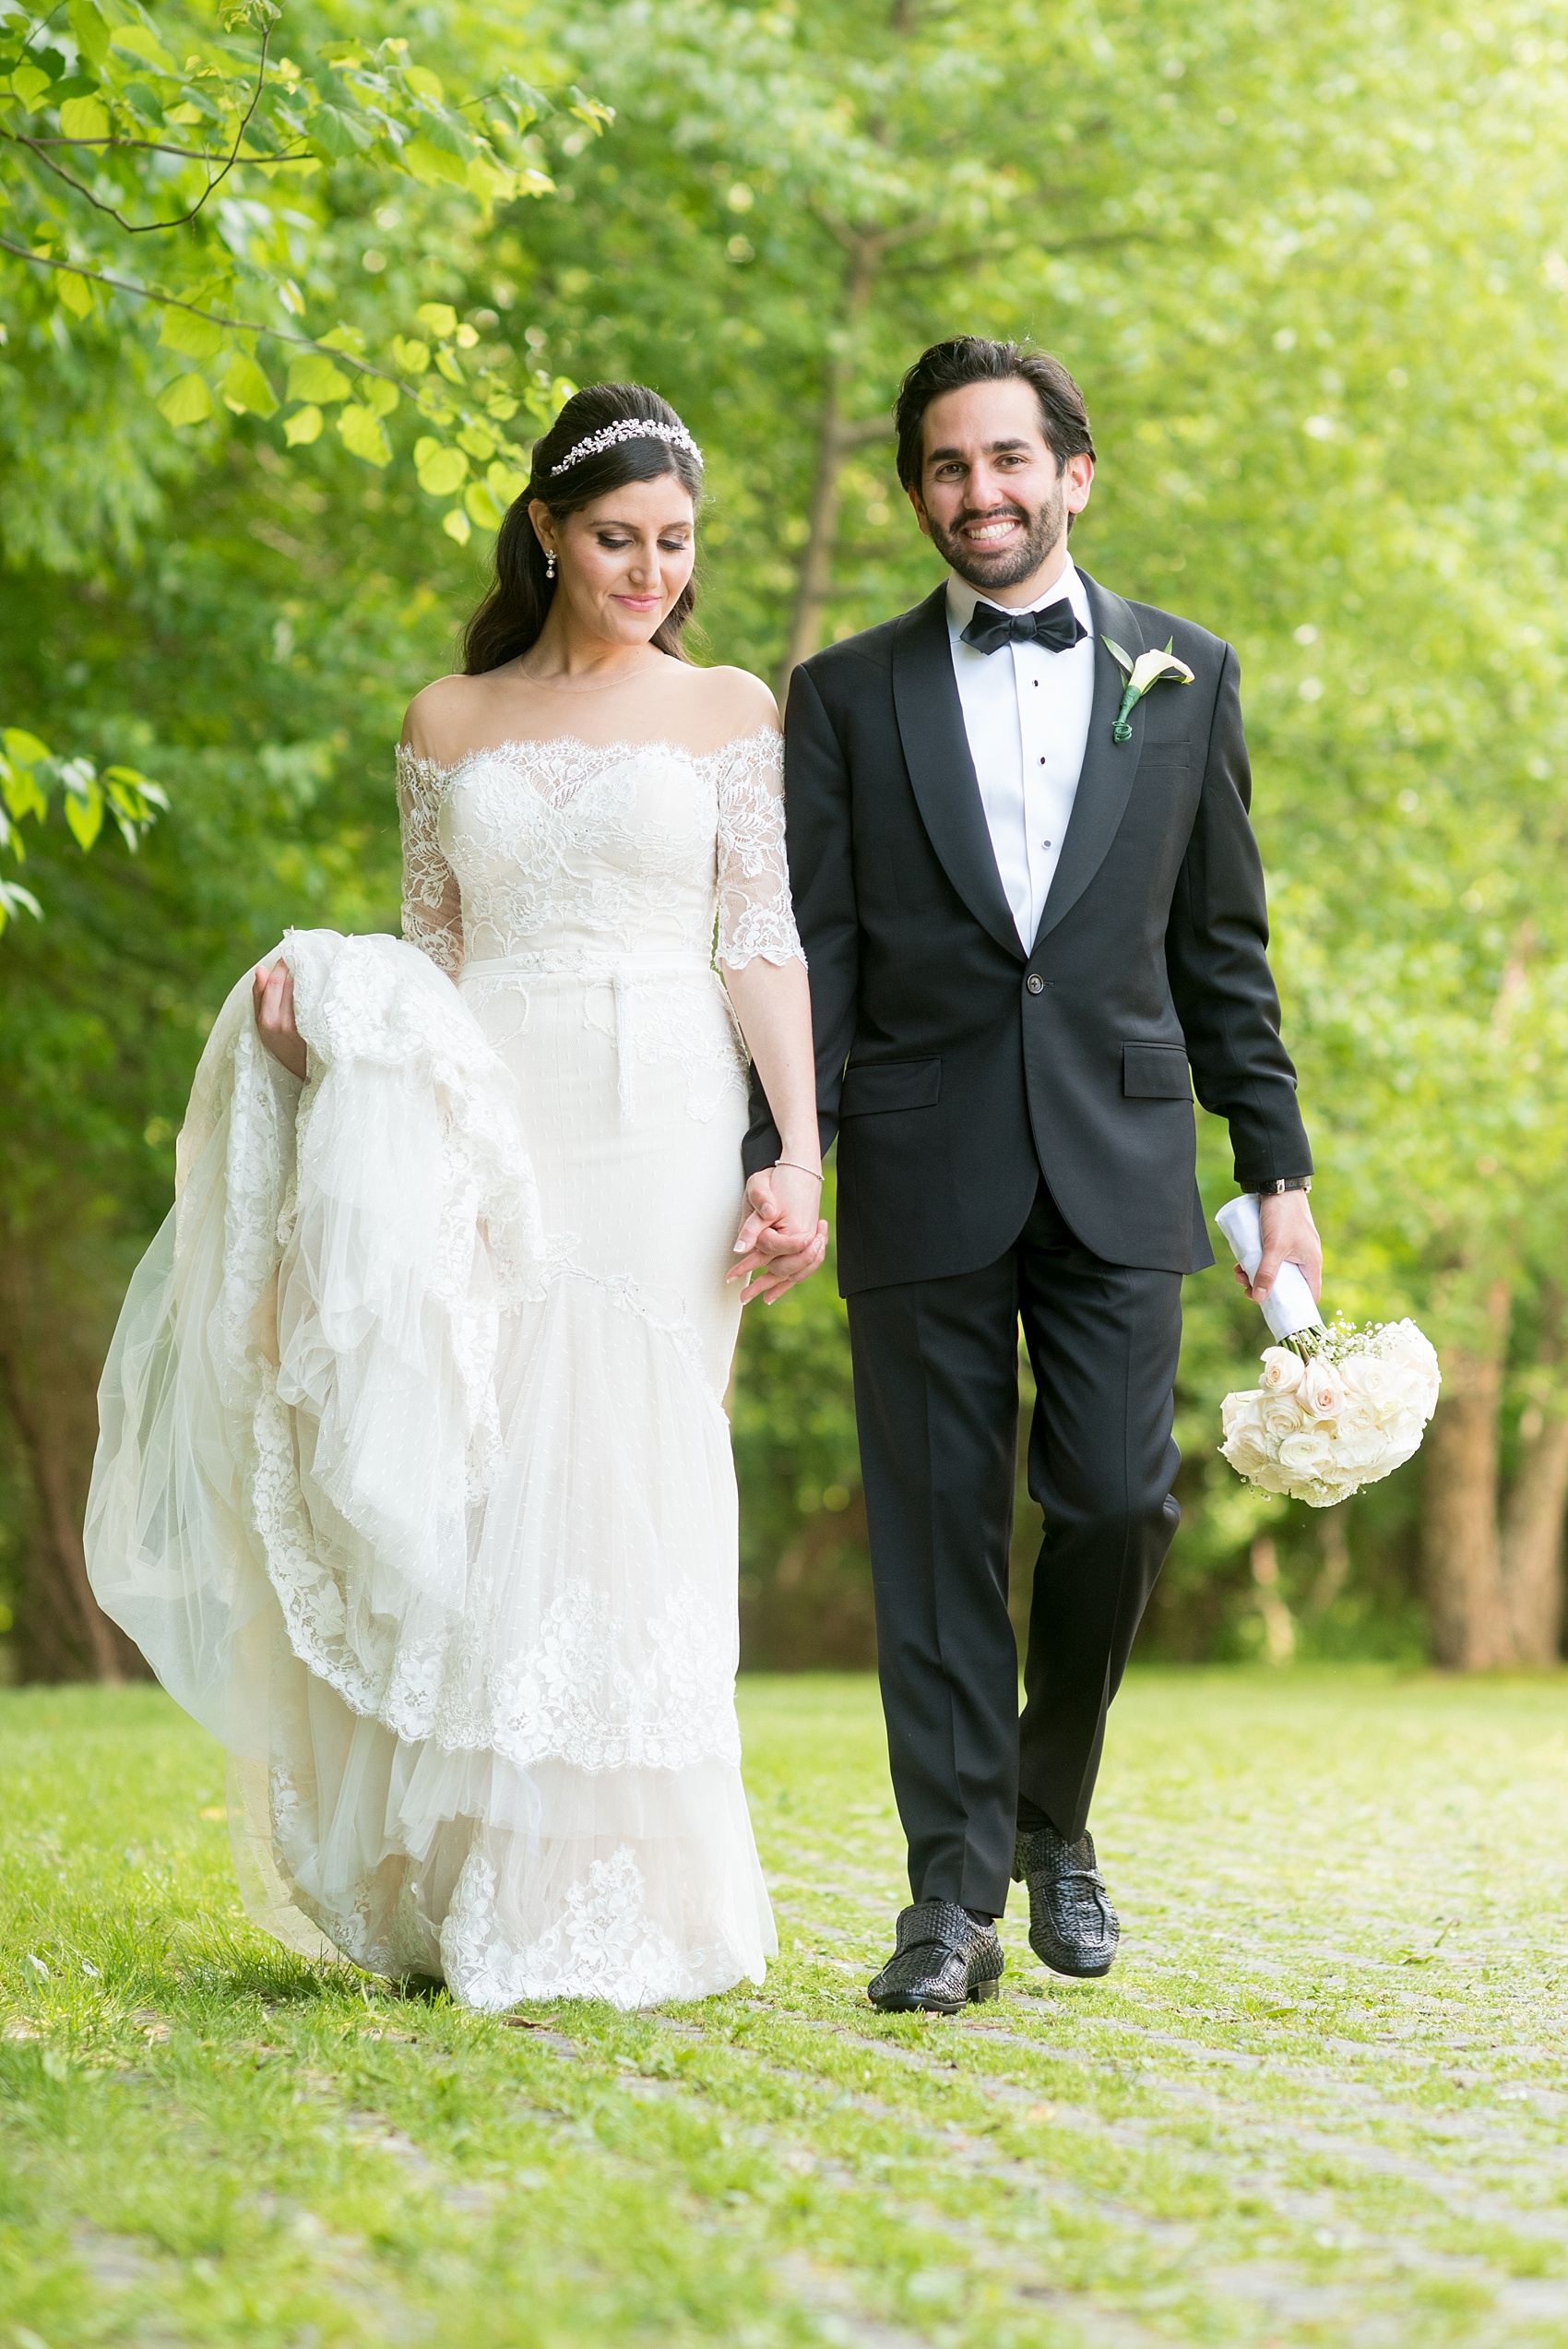 Mikkel Paige Photography photo of the bride in her long sleeve Inbal Dror gown and groom on their wedding day at Temple Emanu-El in Closter, NJ. 